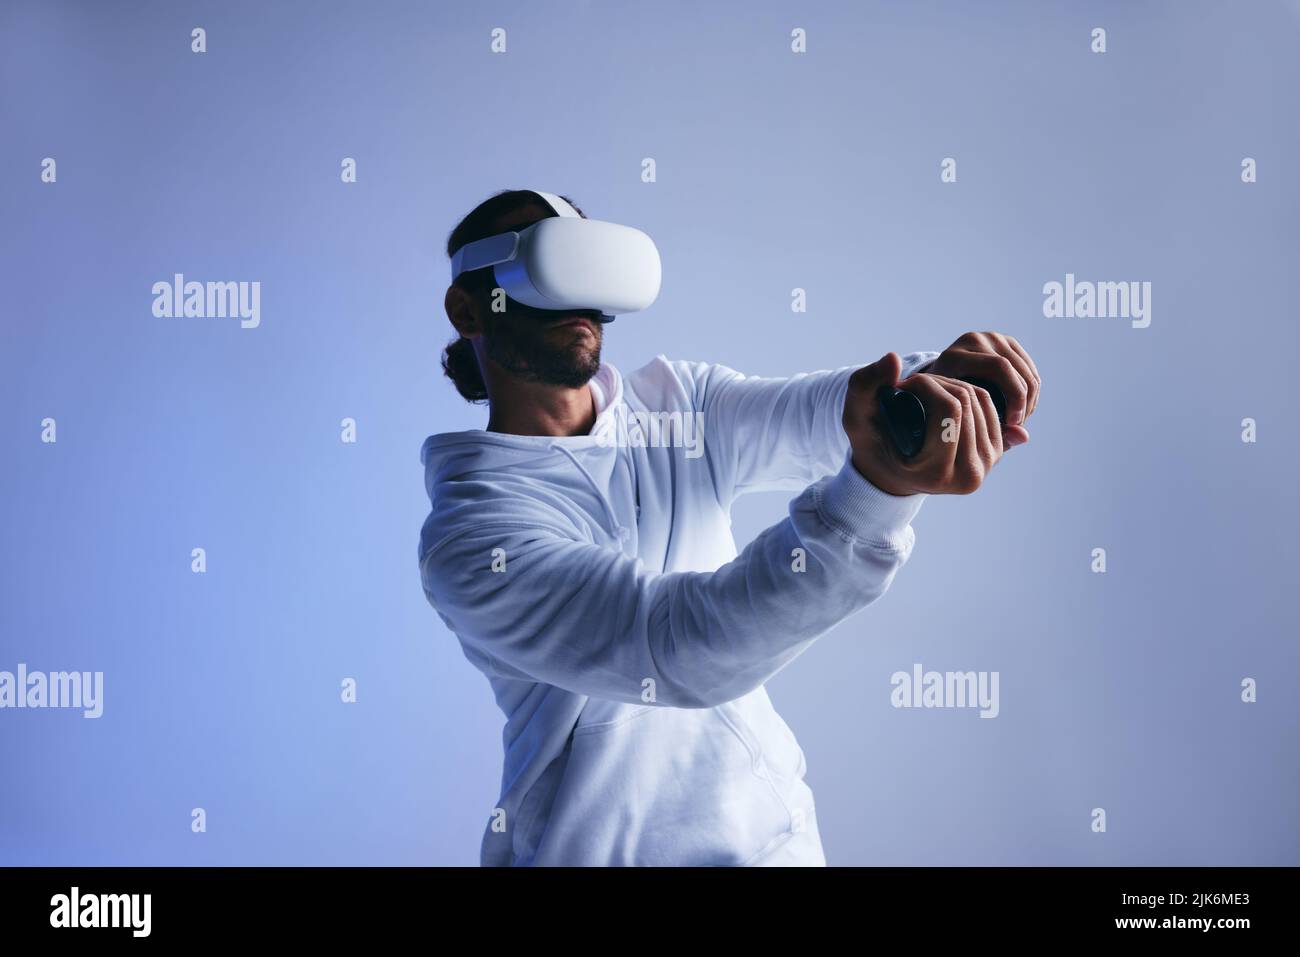 Man playing a game of cricket in virtual reality. Sporty young man batting a virtual ball using gaming controllers. Active young man exploring immersi Stock Photo